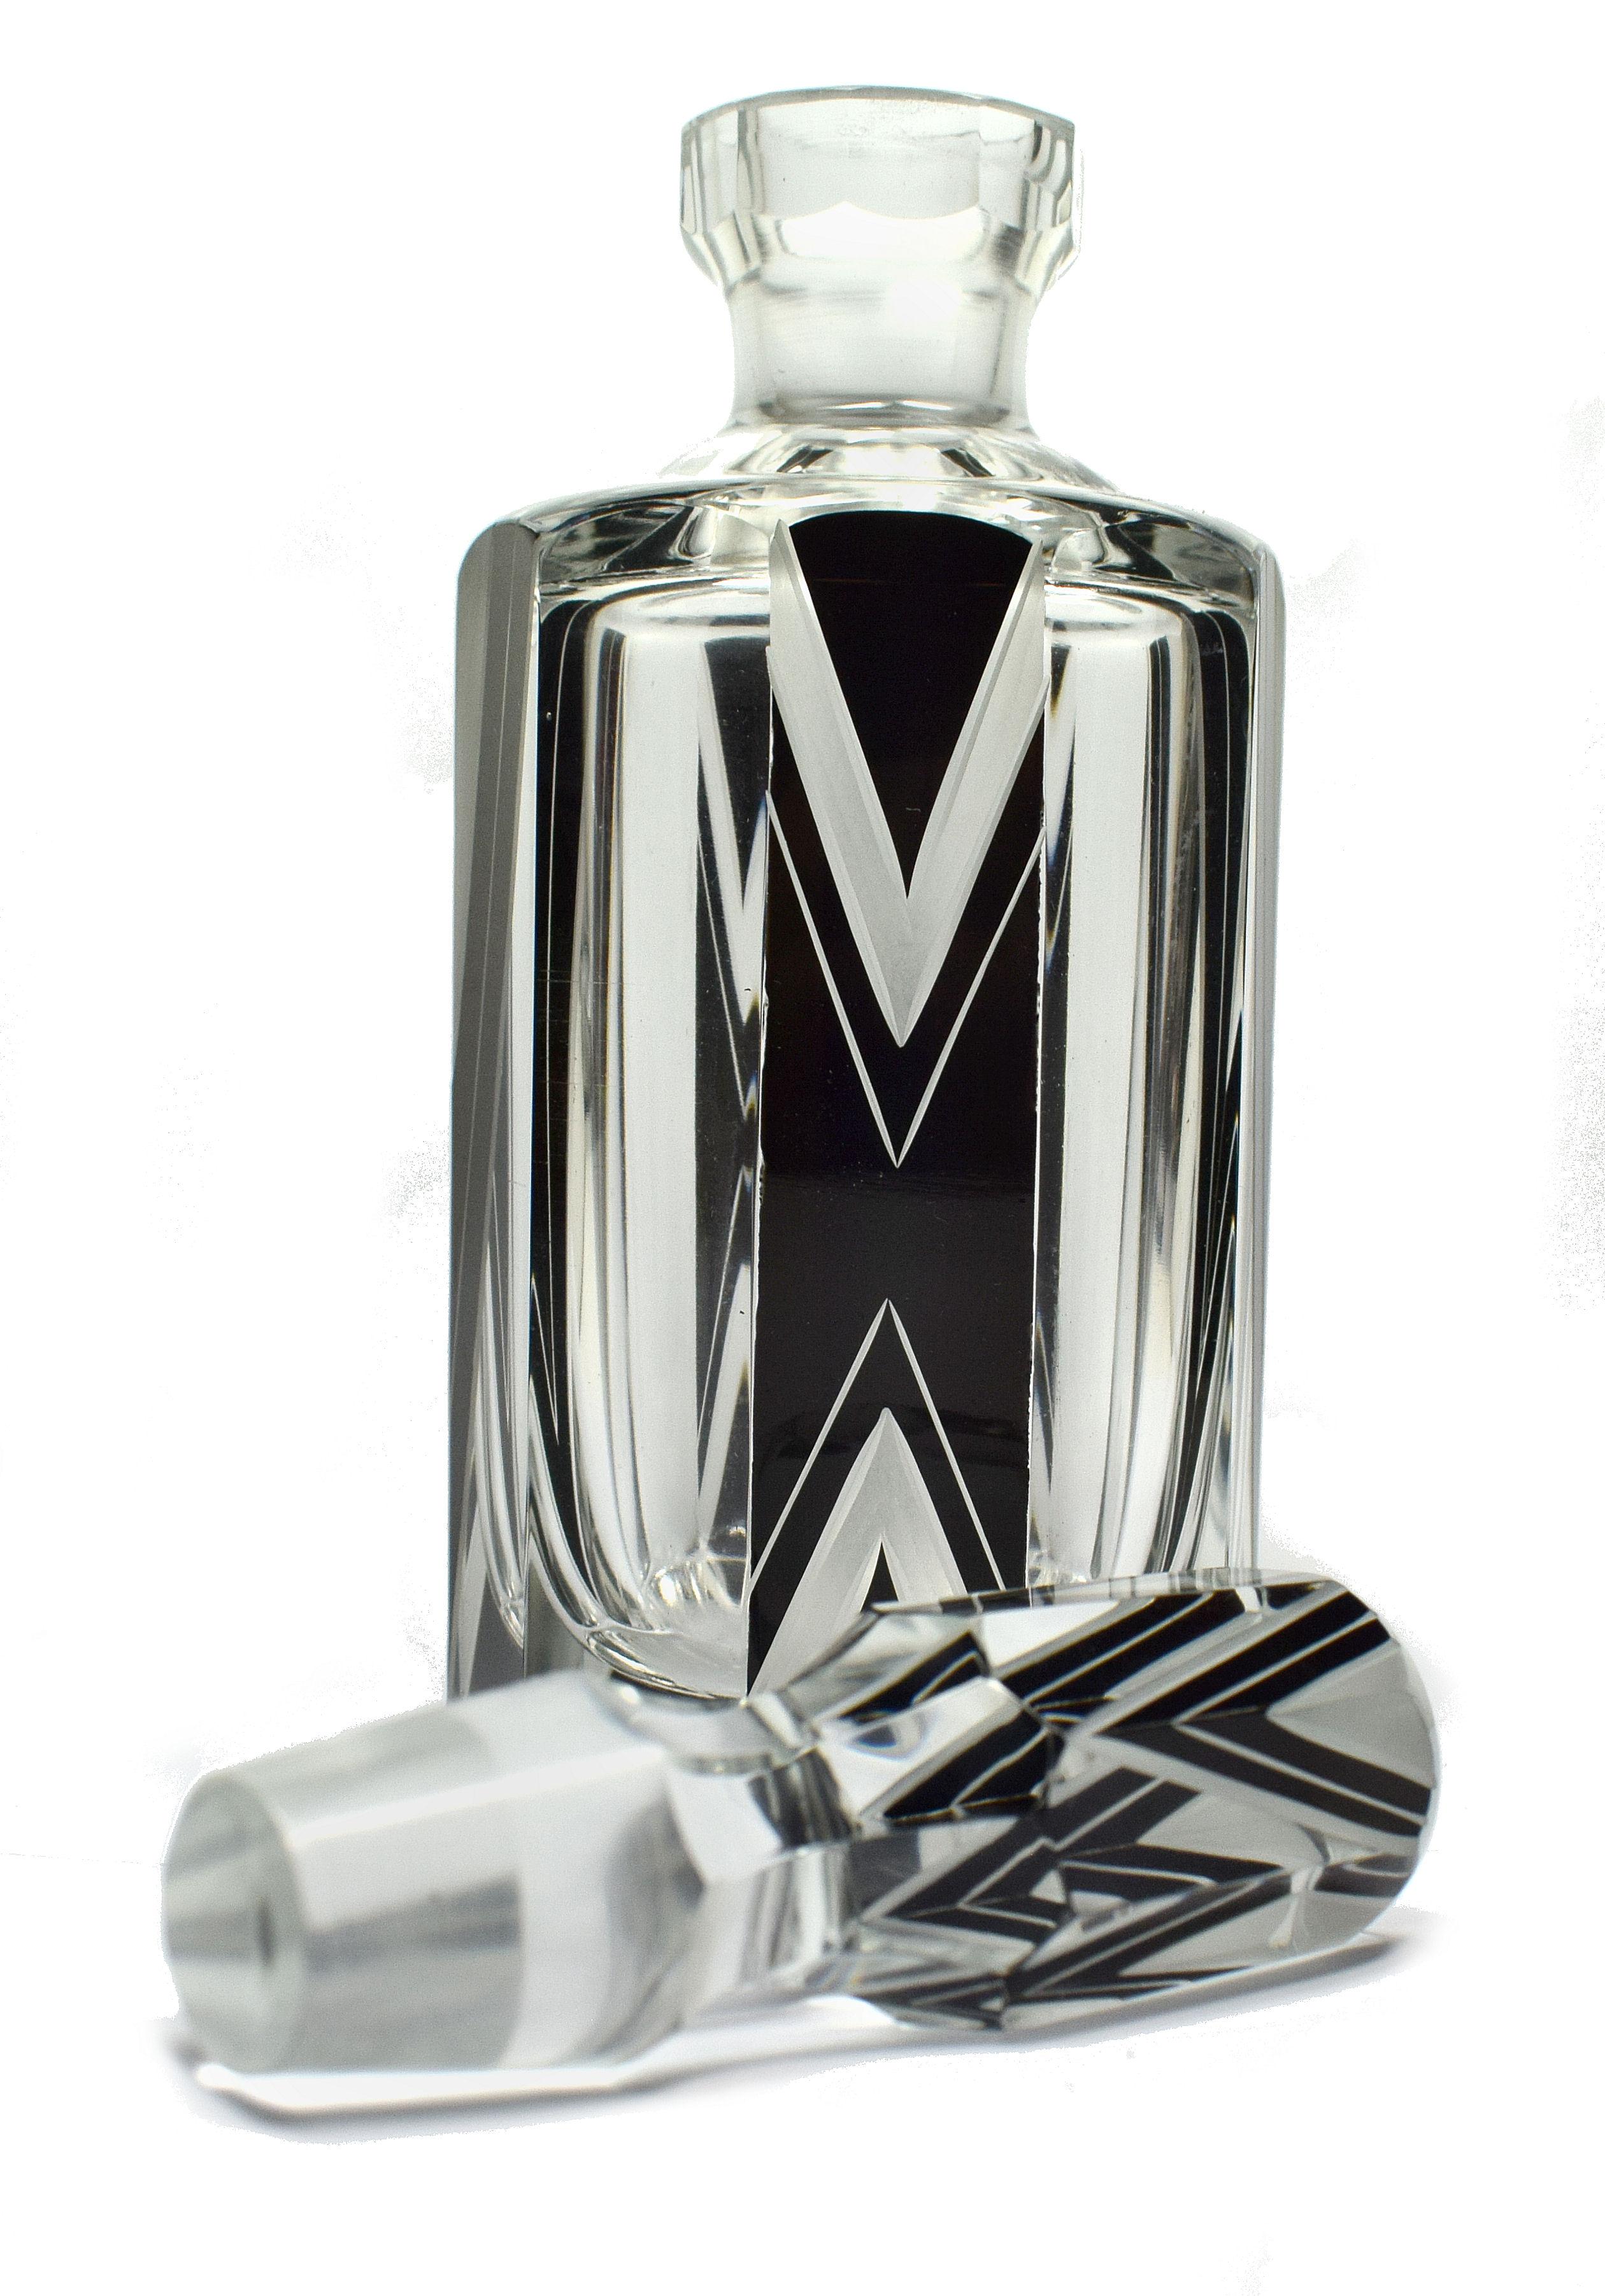 For your consideration is this wonderful 1930s Art Deco glass perfume bottle, it's an absolute beauty and such a rare find. Black enamel with etched glass in geometric forms makes up the decoration to the exterior of the bottle and it's stopper.